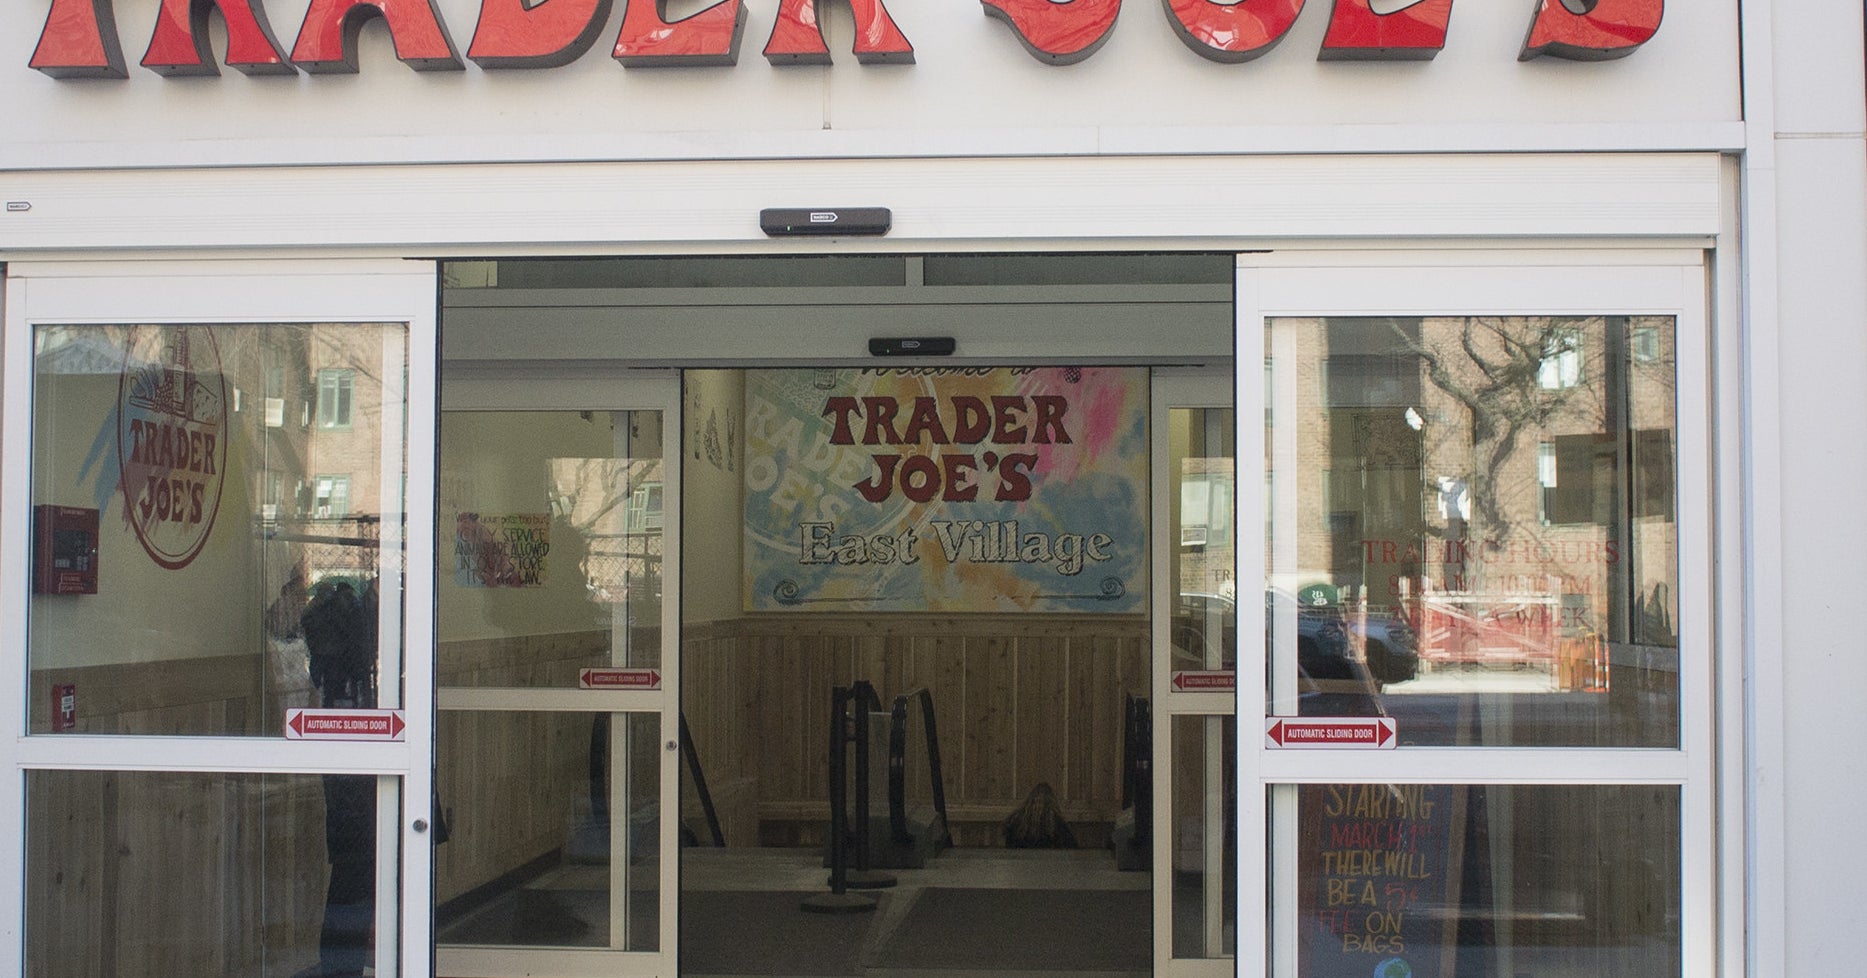 A Trader Joe employee said he was fired for requesting better COVID-19 protections